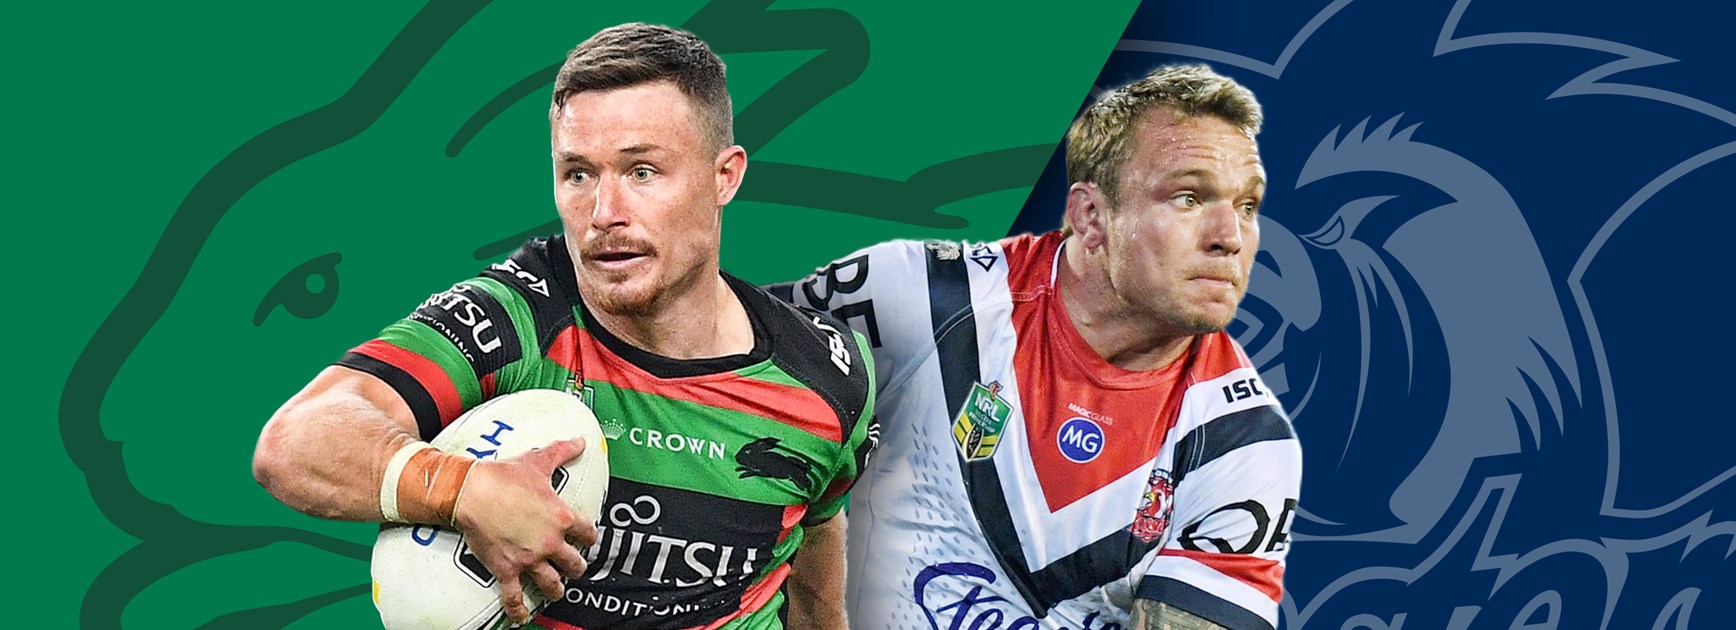 Rabbitohs v Roosters: Burns to start for Graham, Roosters unchanged